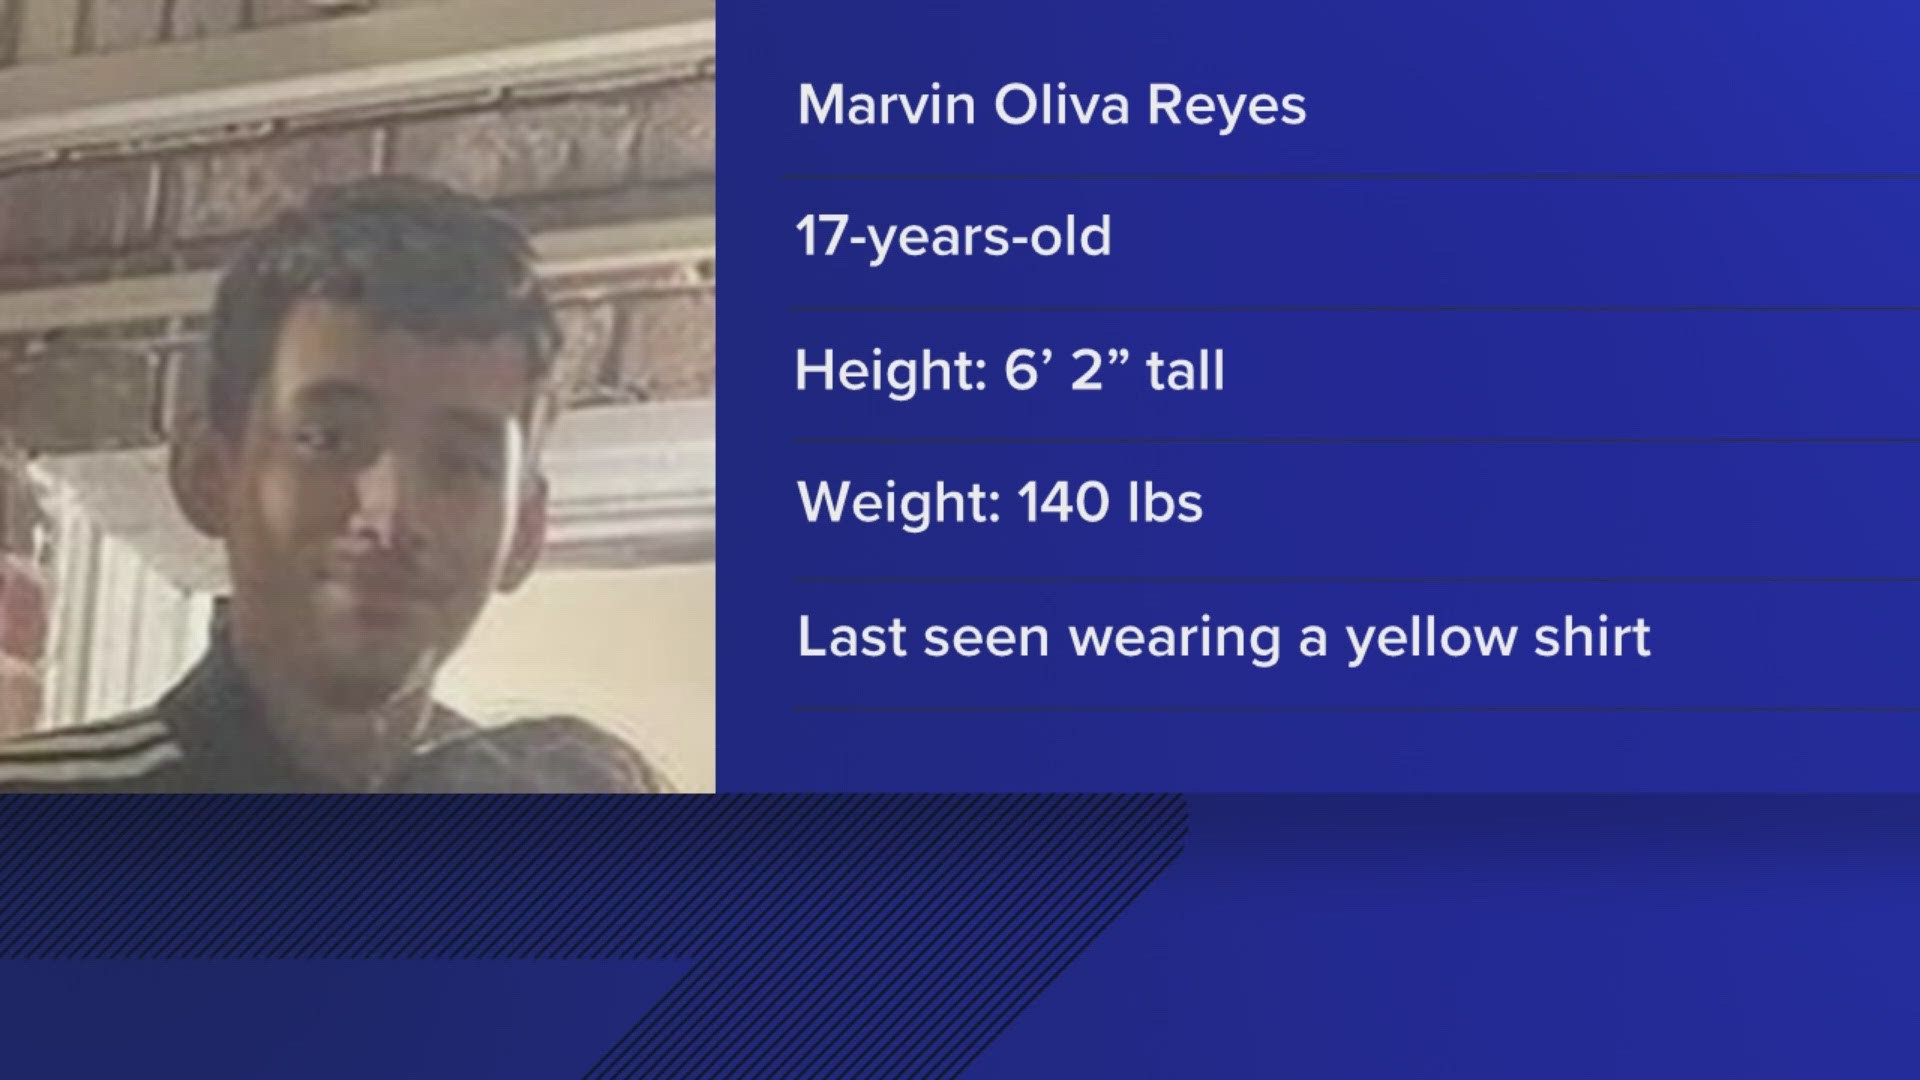 Police said three people were on board when the boat started to sink. Two of them managed to get to safety but the search continued Sunday for Marvin Reyes Oliva.